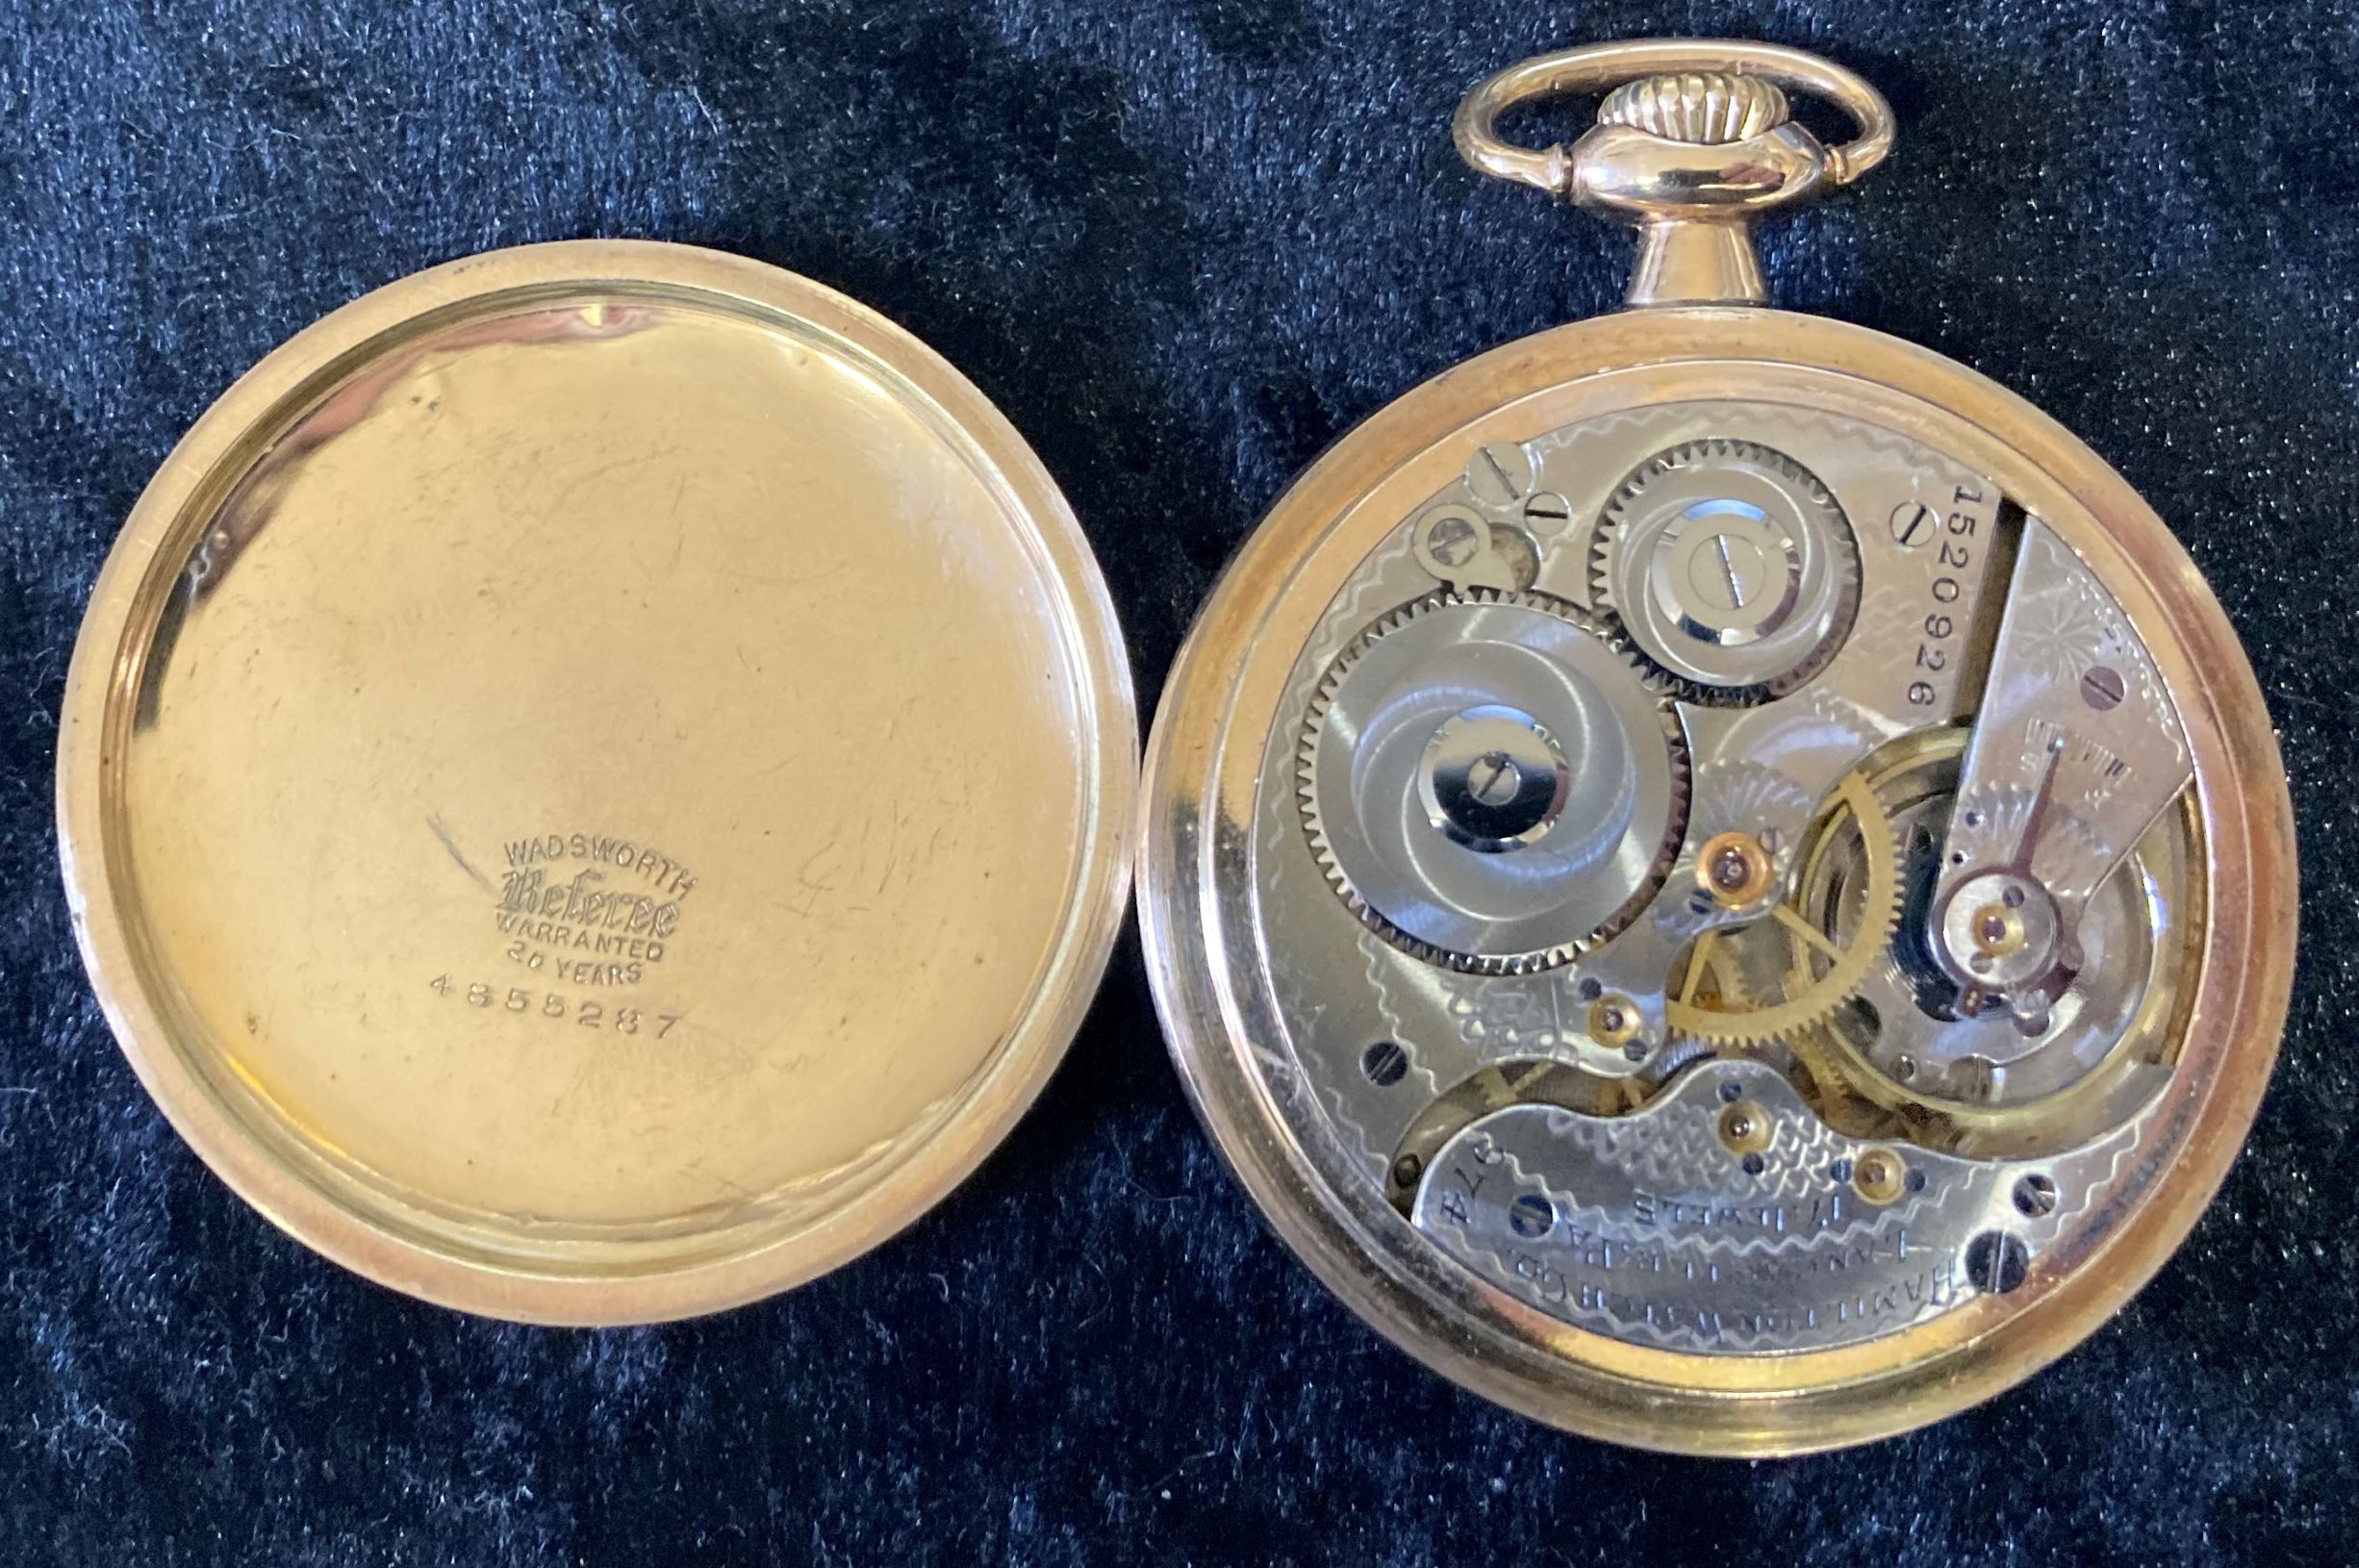 Hamilton Gold Plated Pocket Watch - Image 3 of 4